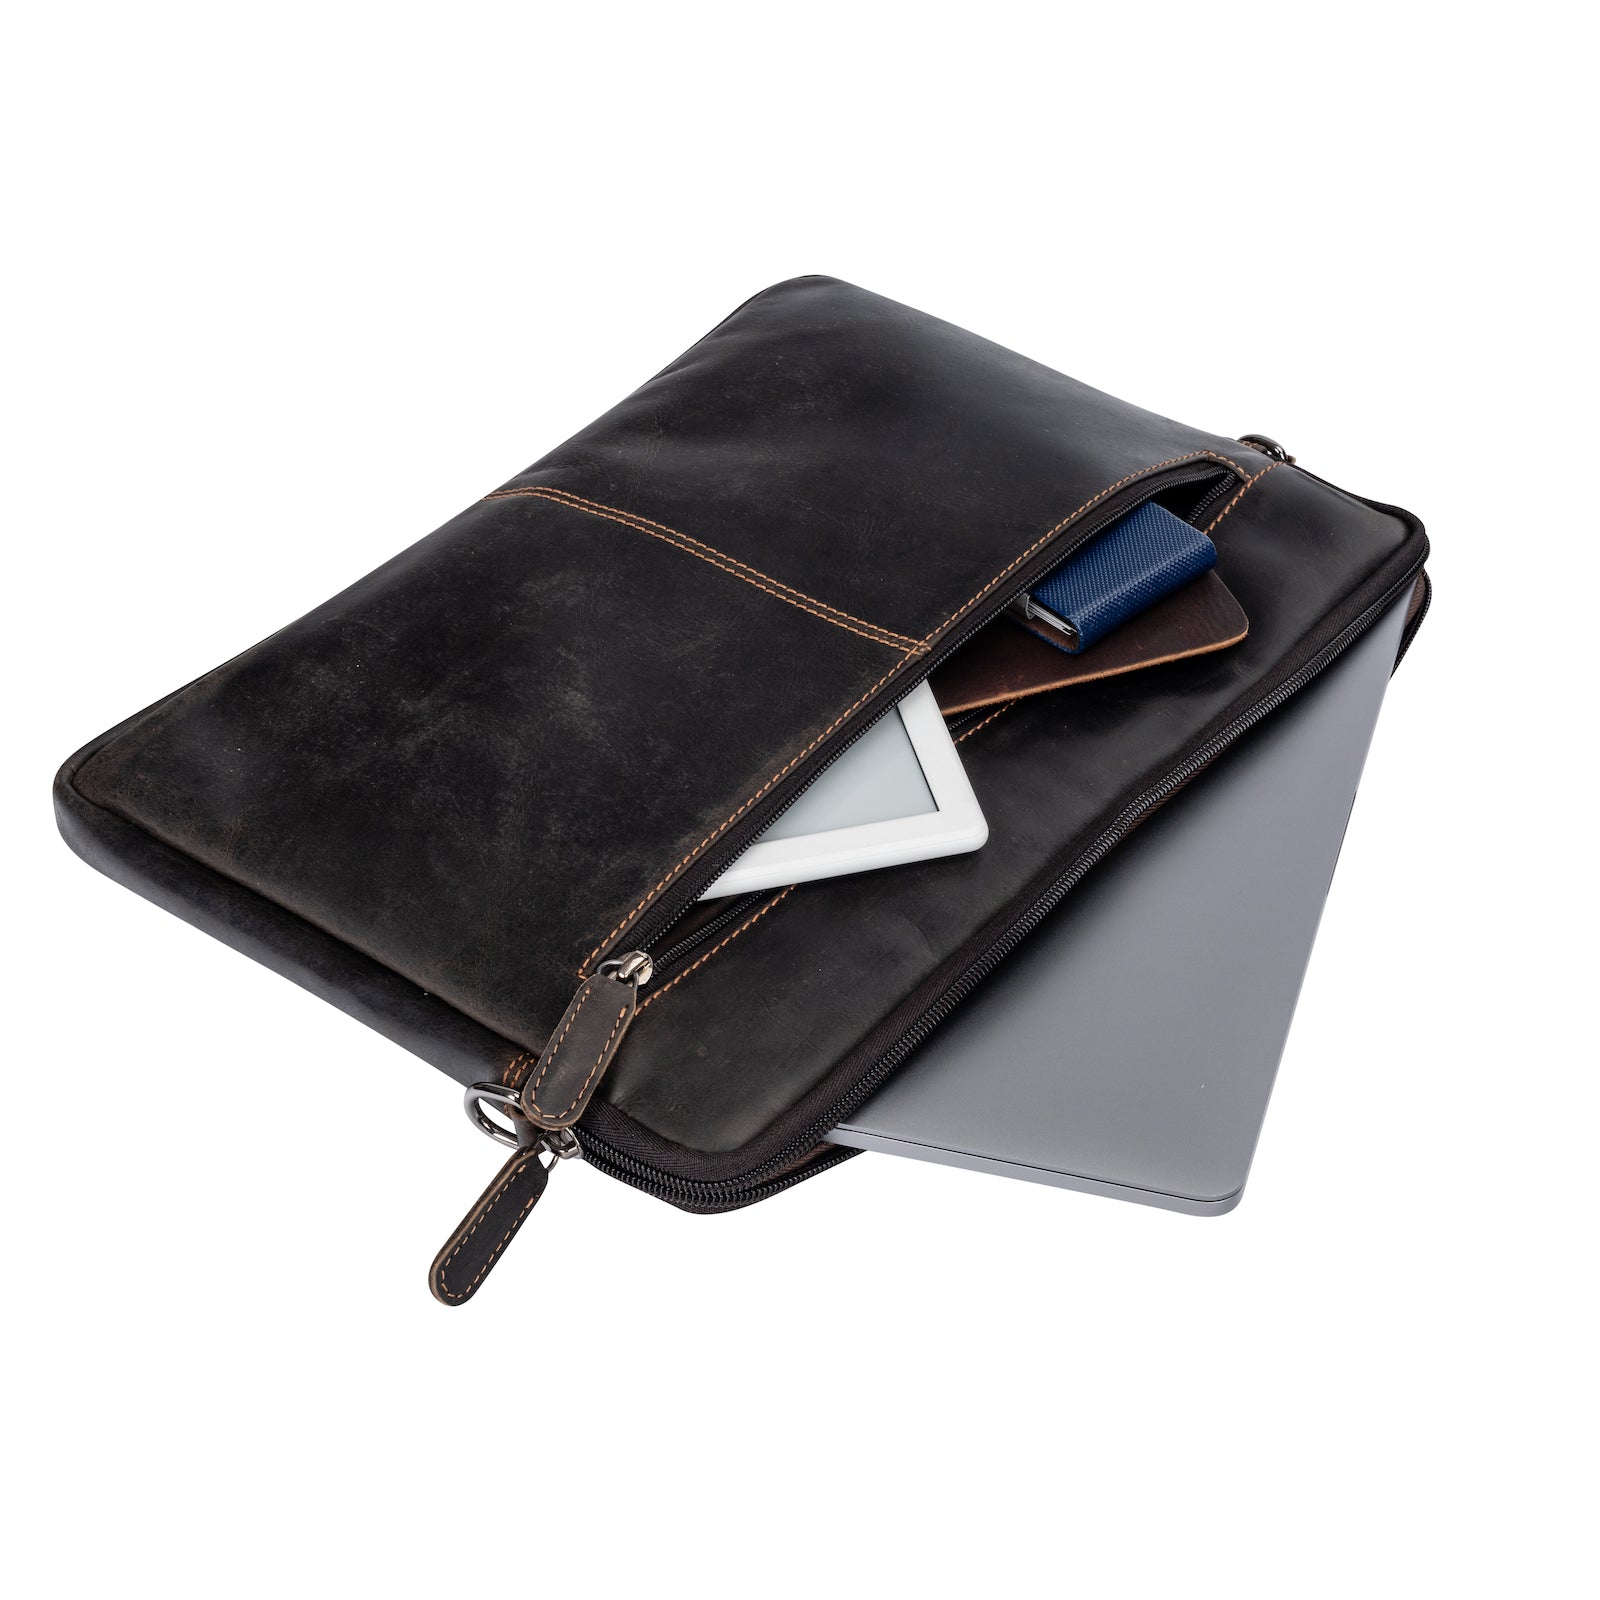 Leather Laptop Sleeve for MacBook or any laptop 13 | Blue